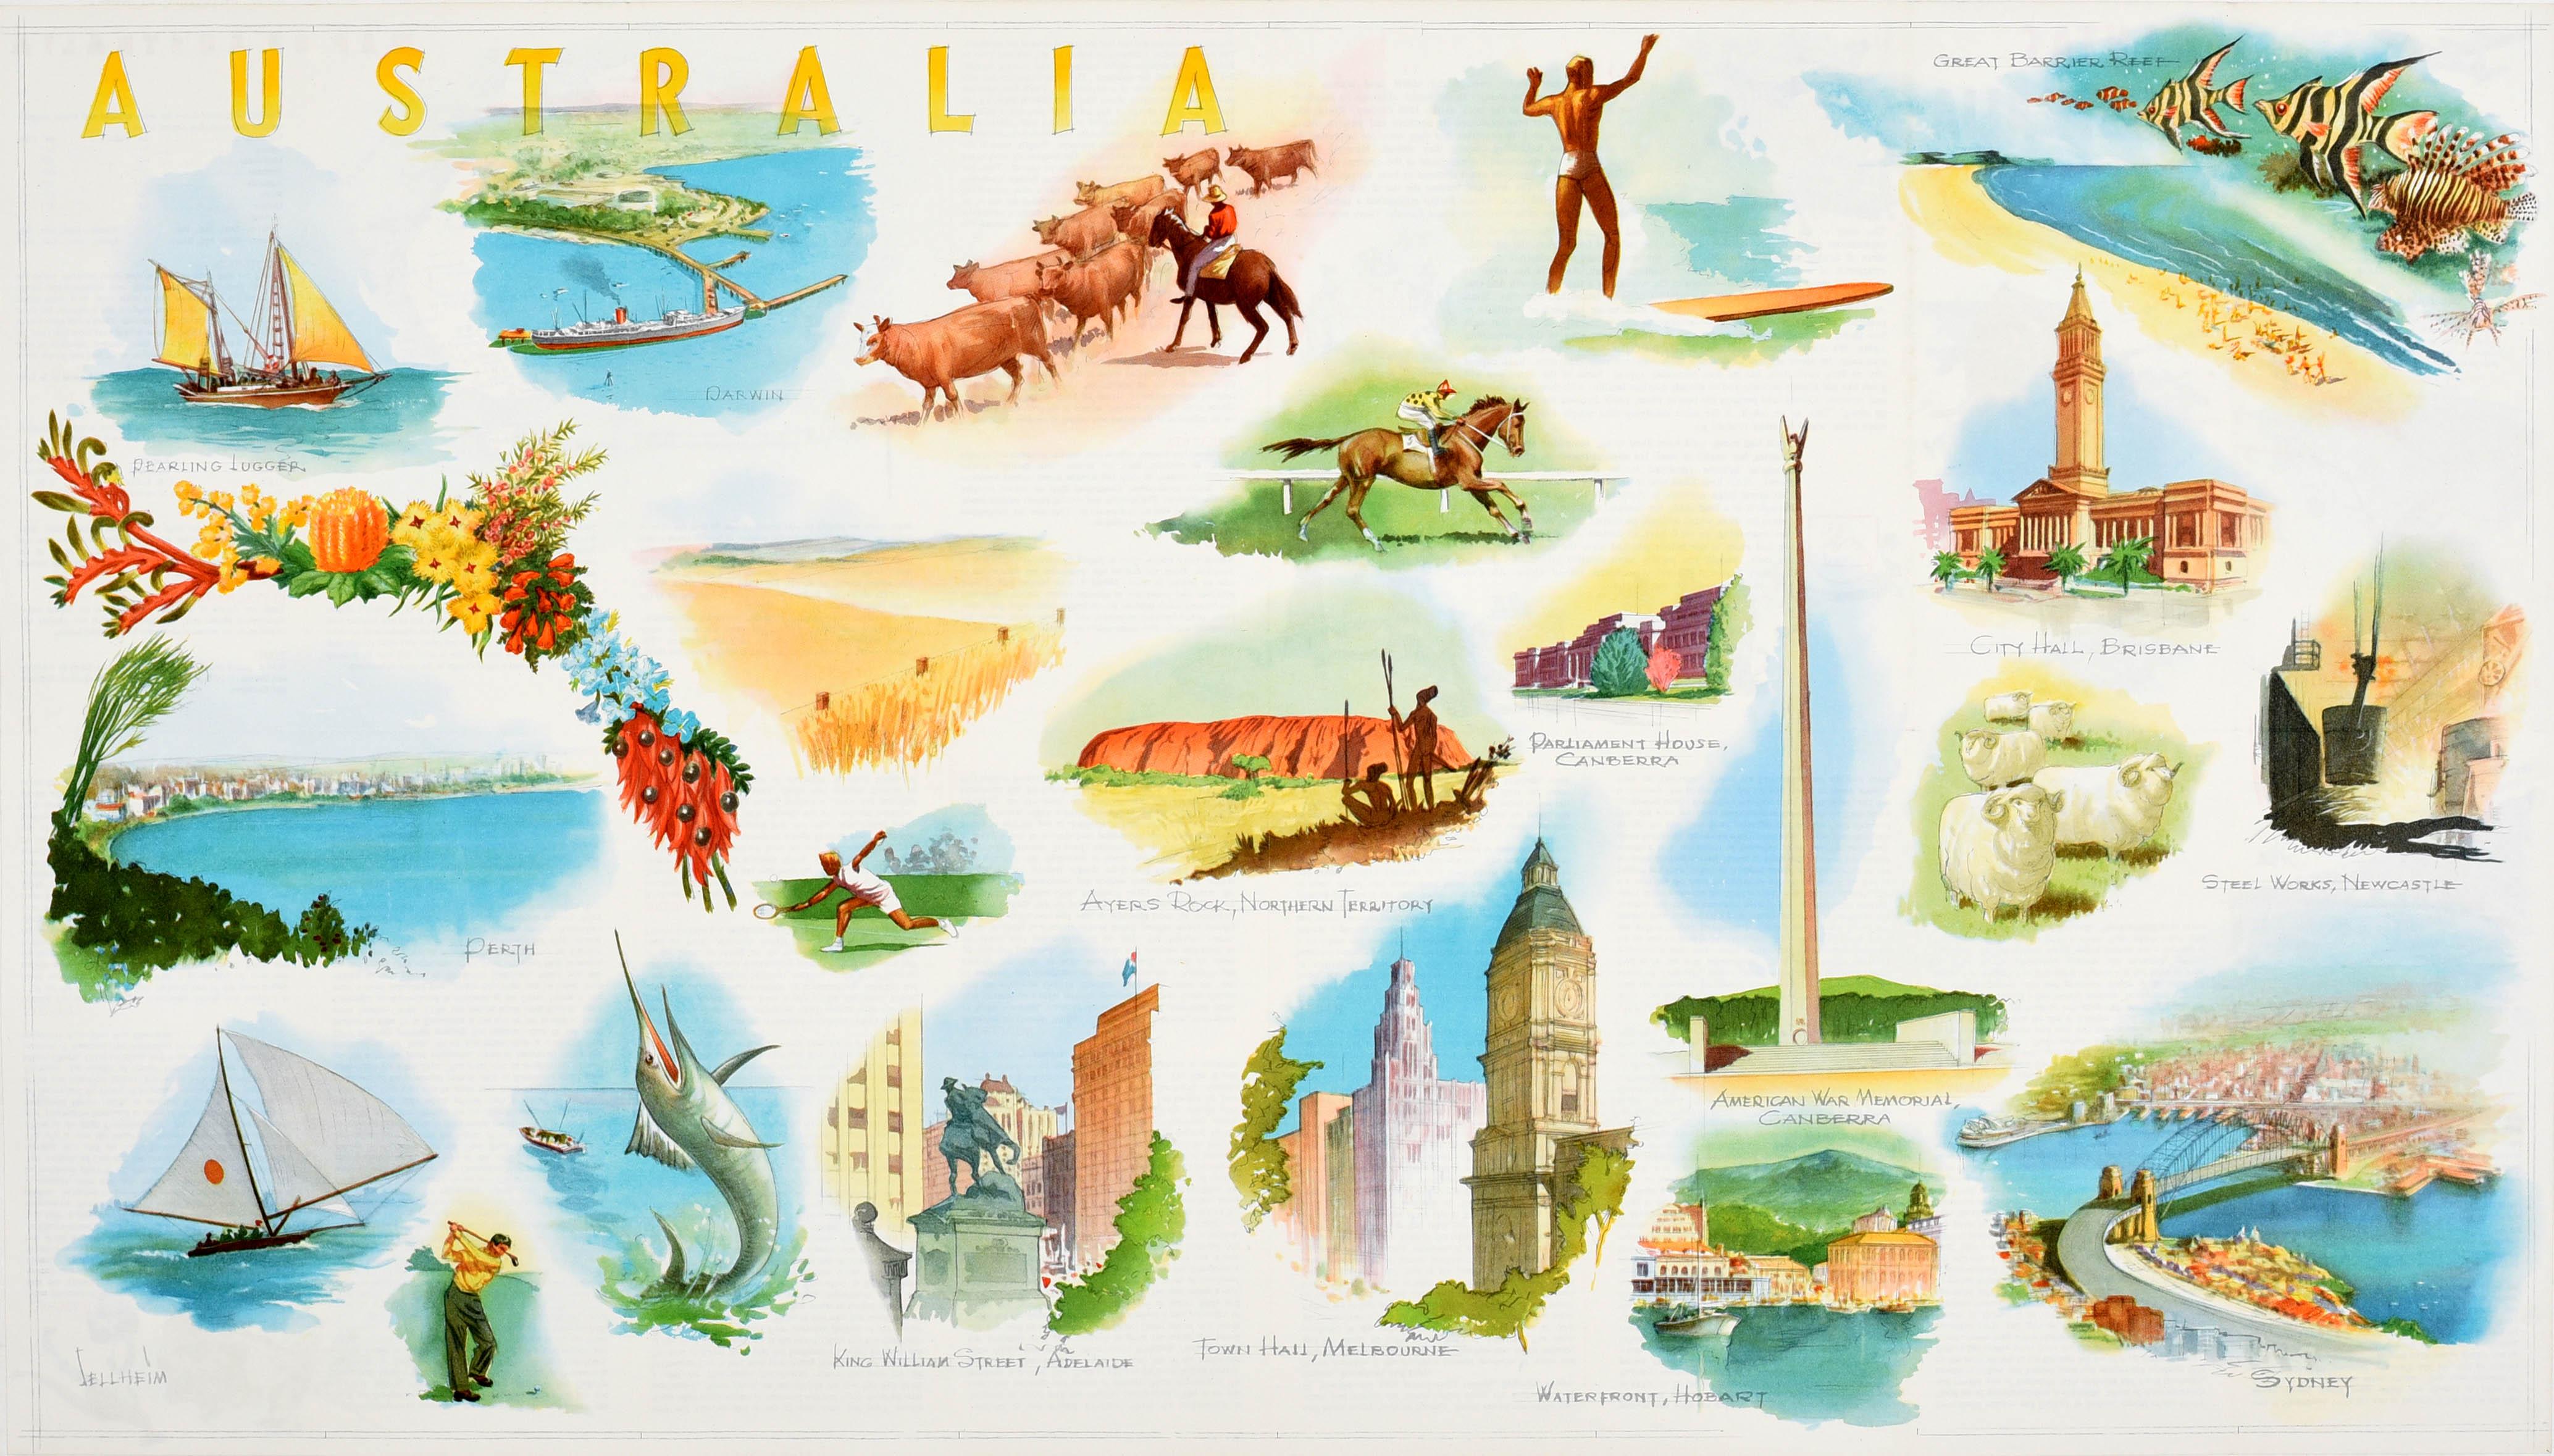 Original vintage travel poster for Australia featuring colourful scenic illustrations of notable Australian locations and activities including a man surfing and fish swimming in a coral Great Barrier Reef, sailing boats and ships, horse racing and a